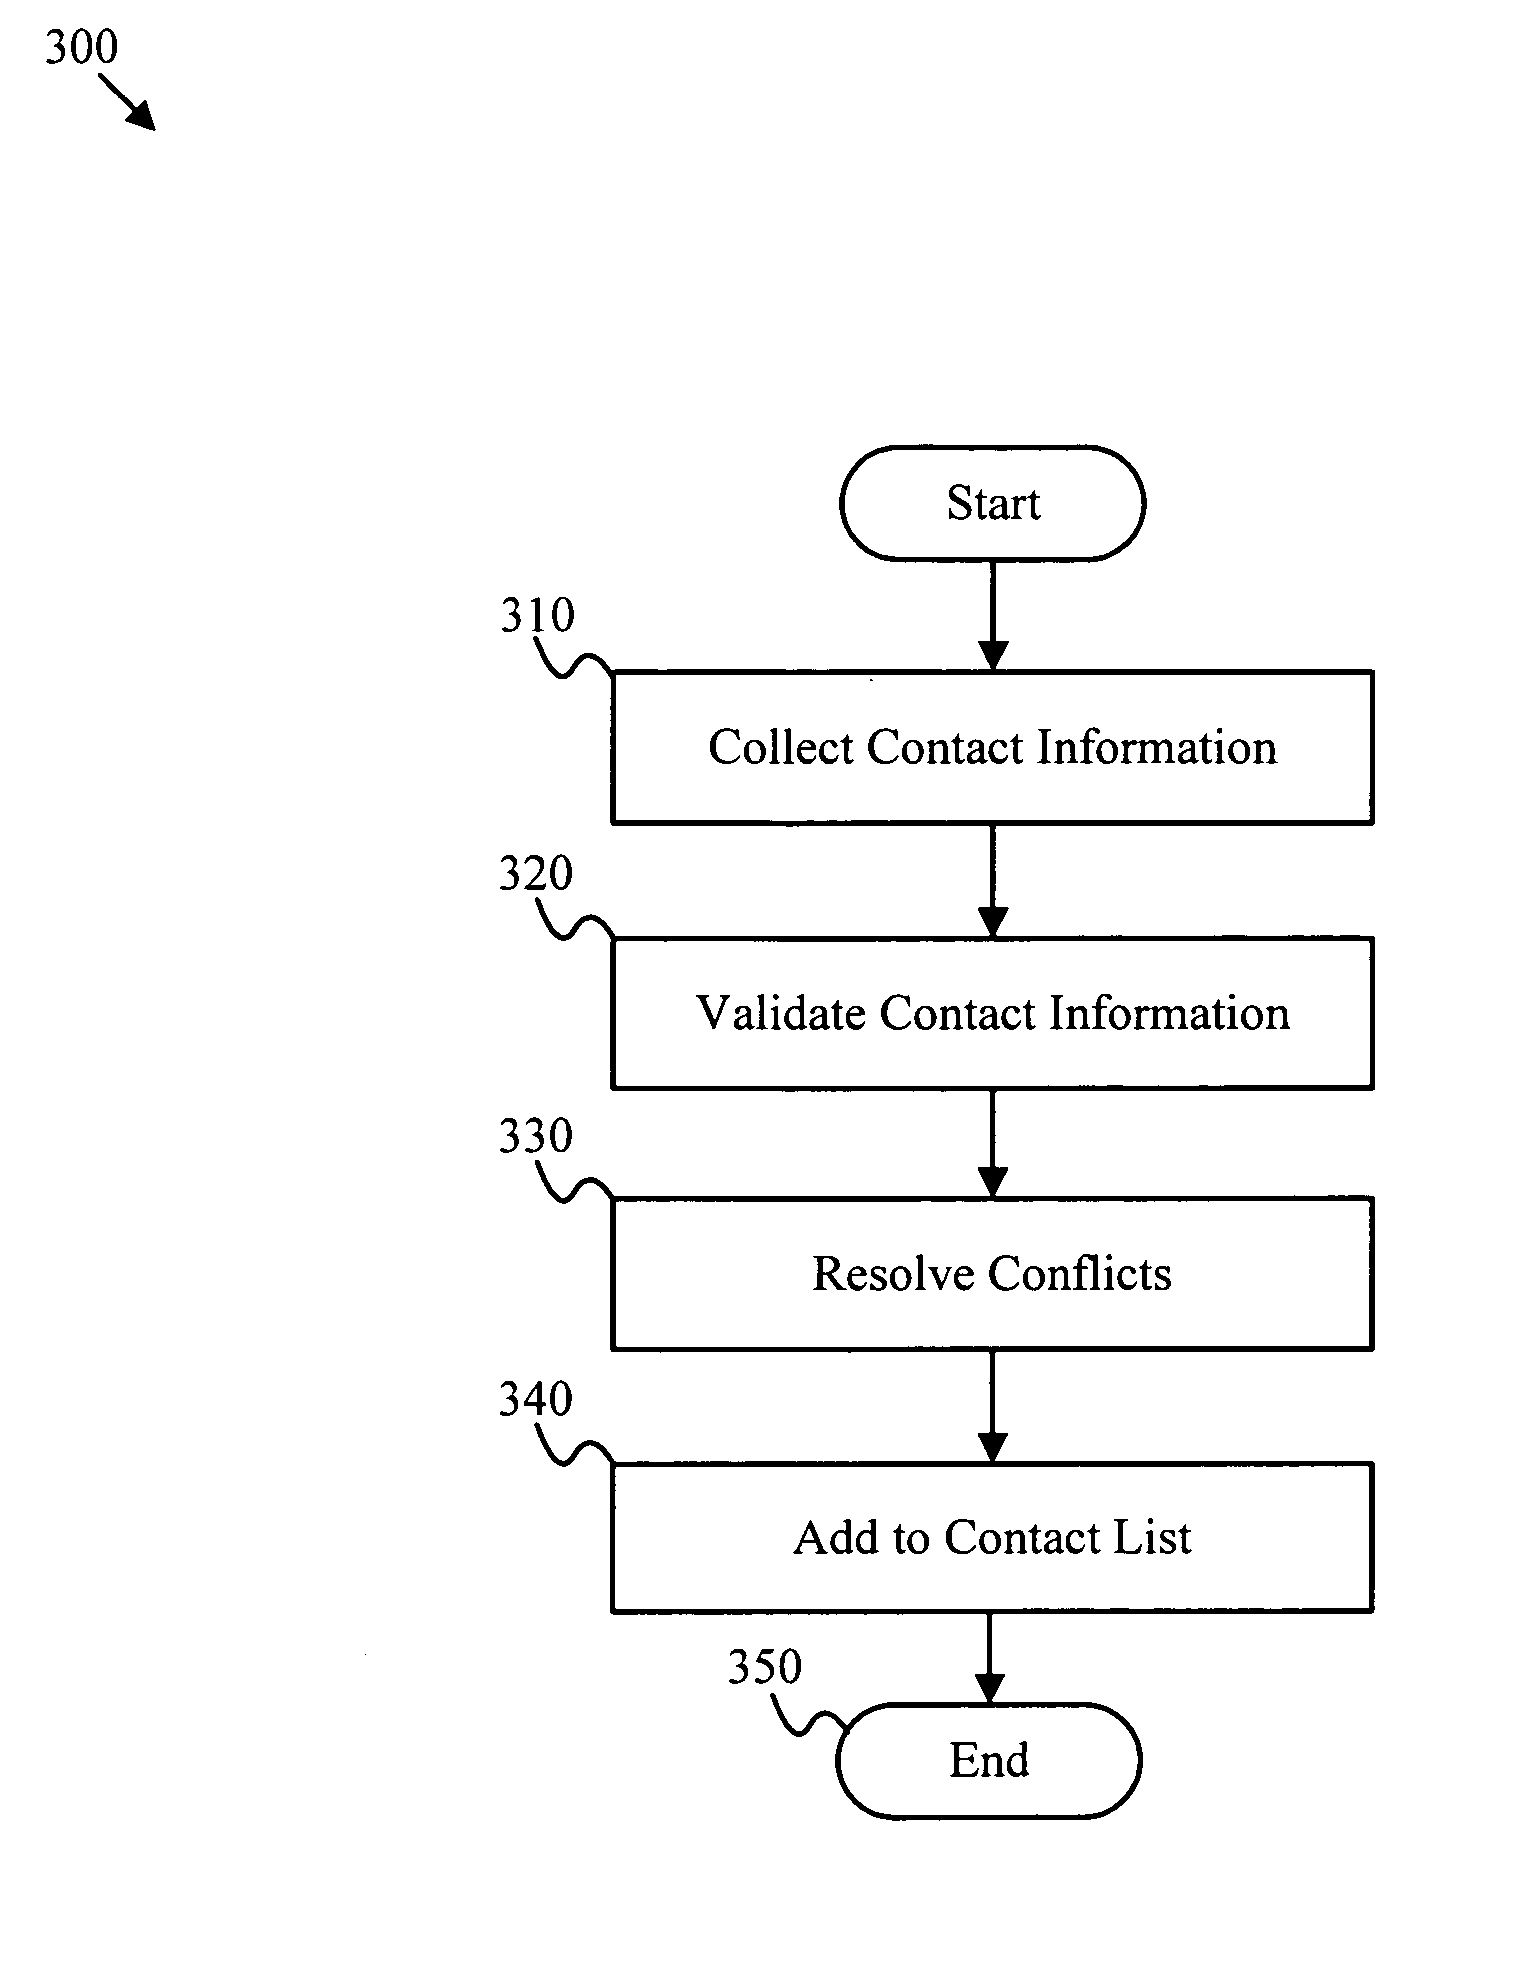 Apparatus method and system for automatically populating an interactive messaging contact list